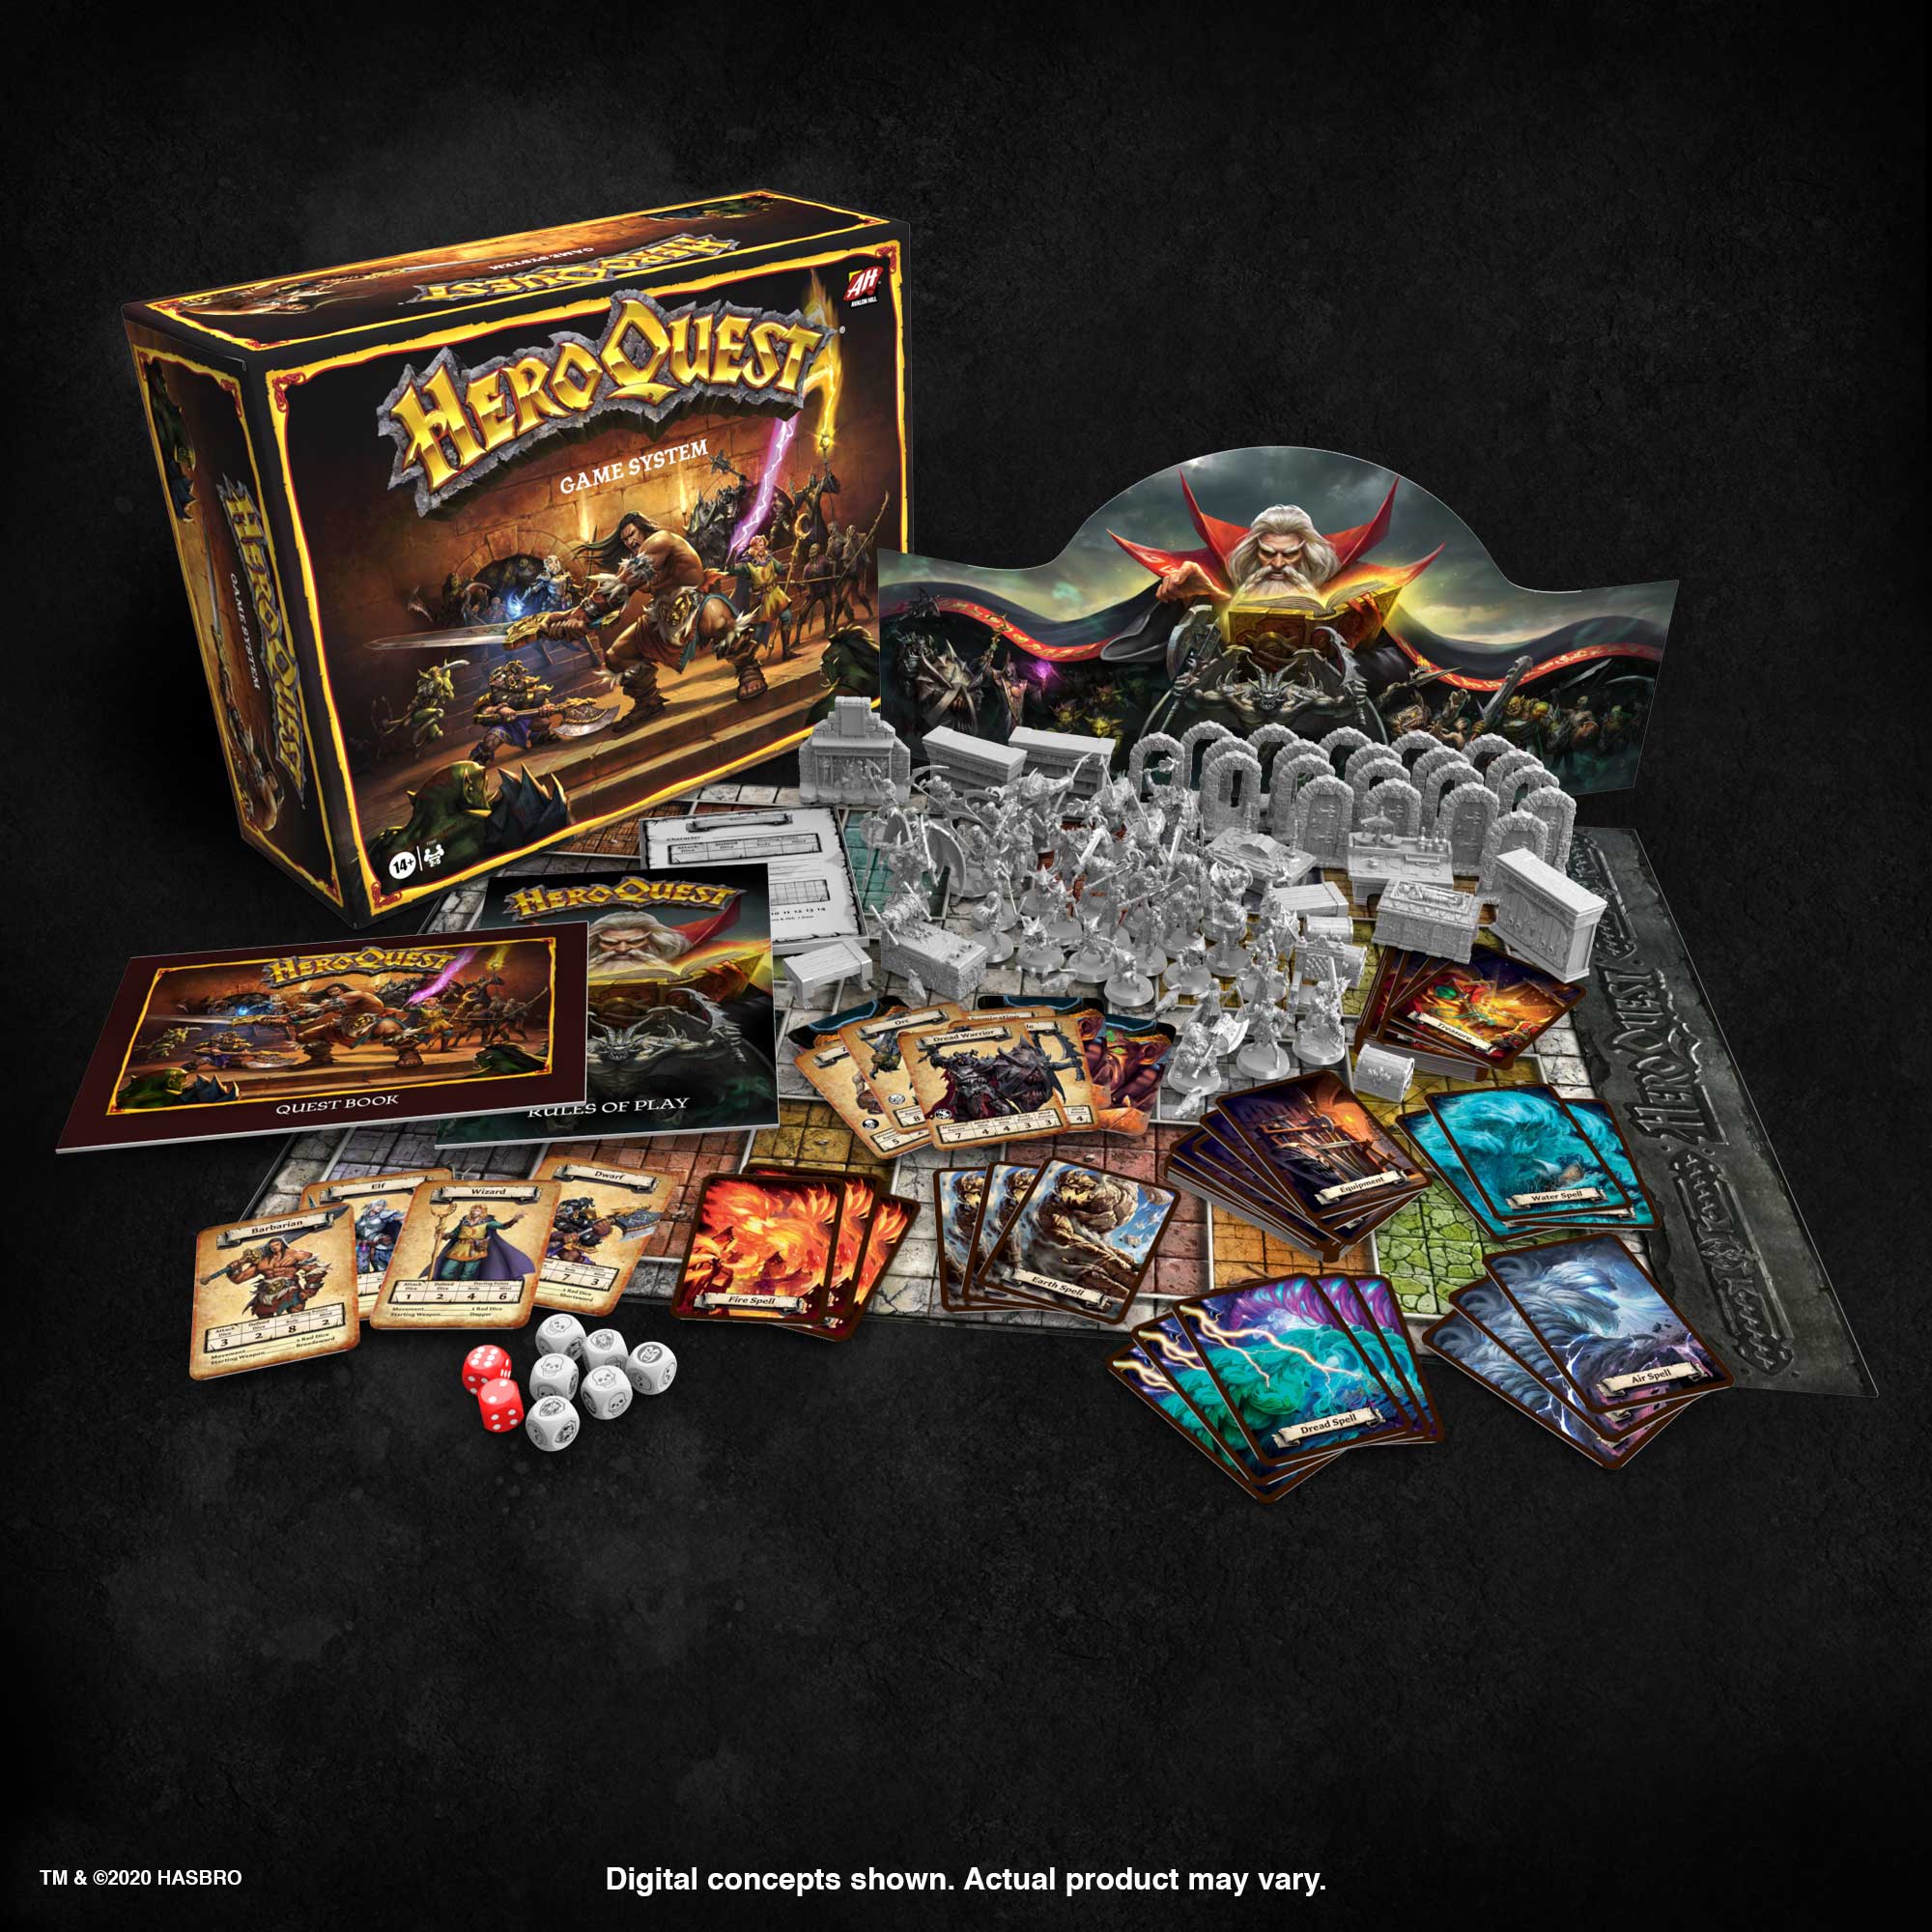 HERO QUEST | The CG Realm